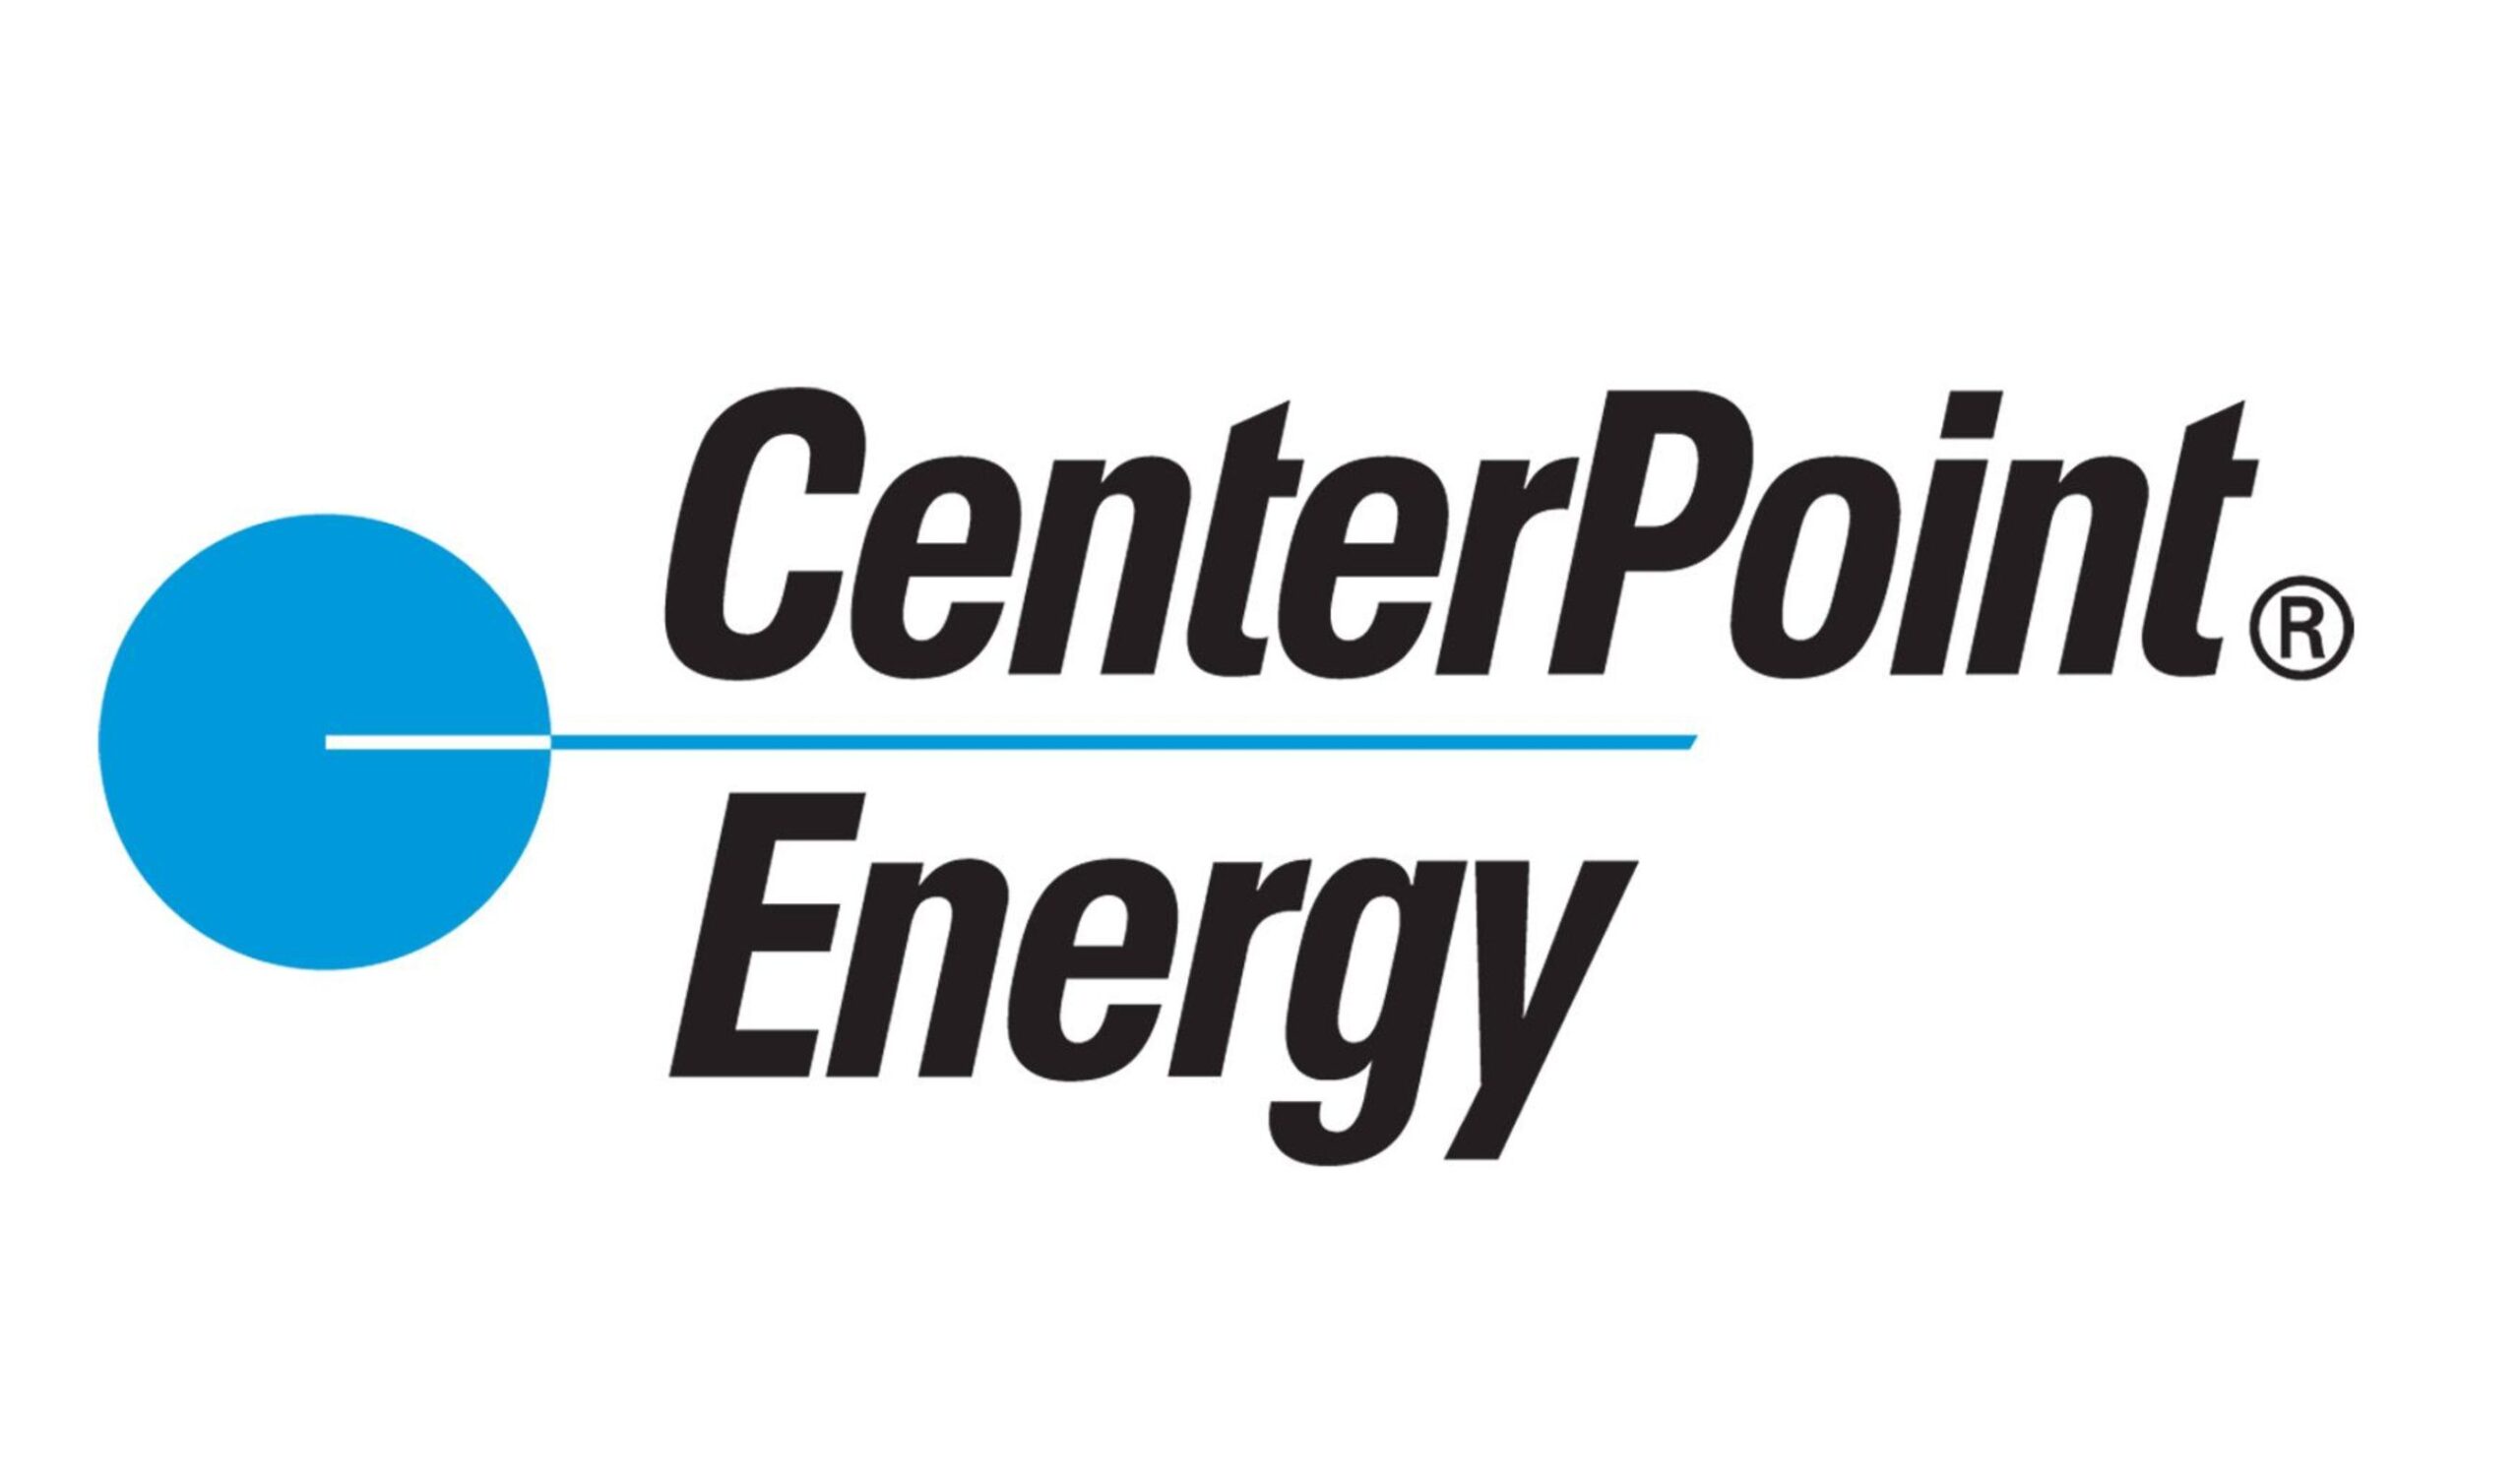 CenterPoint, issuance of second RFP targeting wind, solar and solar